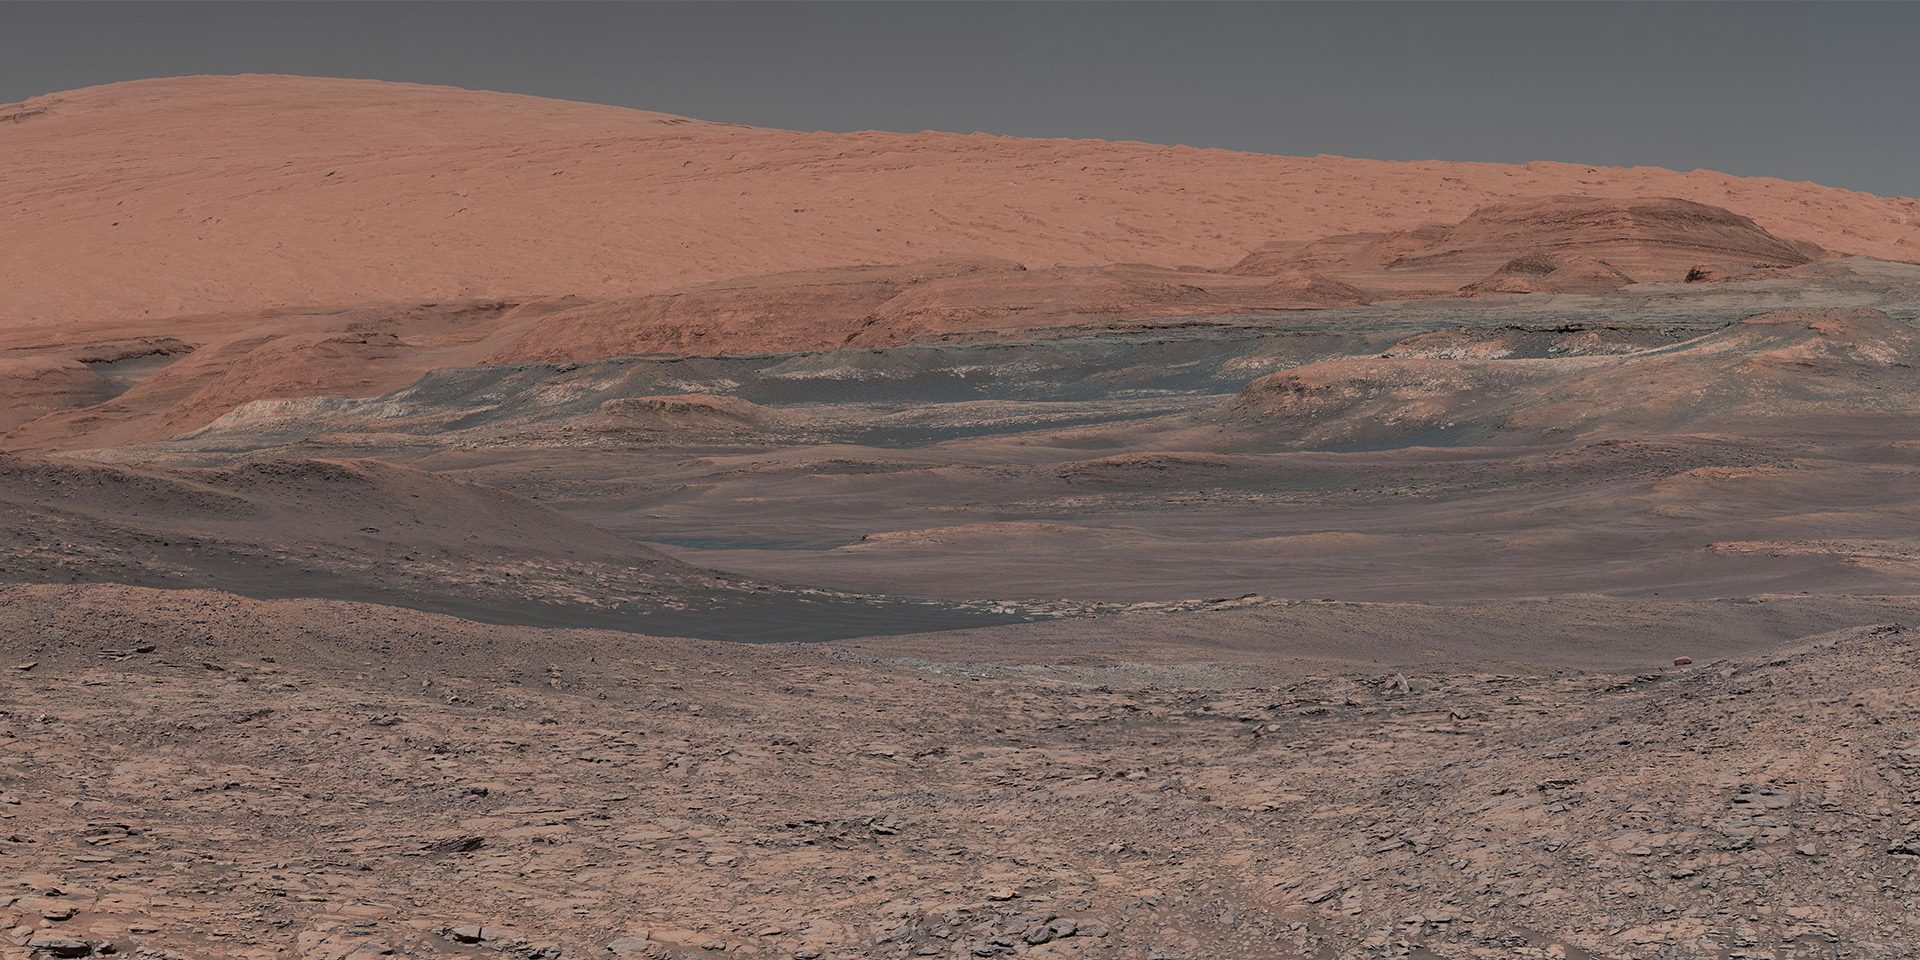 The best pictures of Mars taken by Curiosity